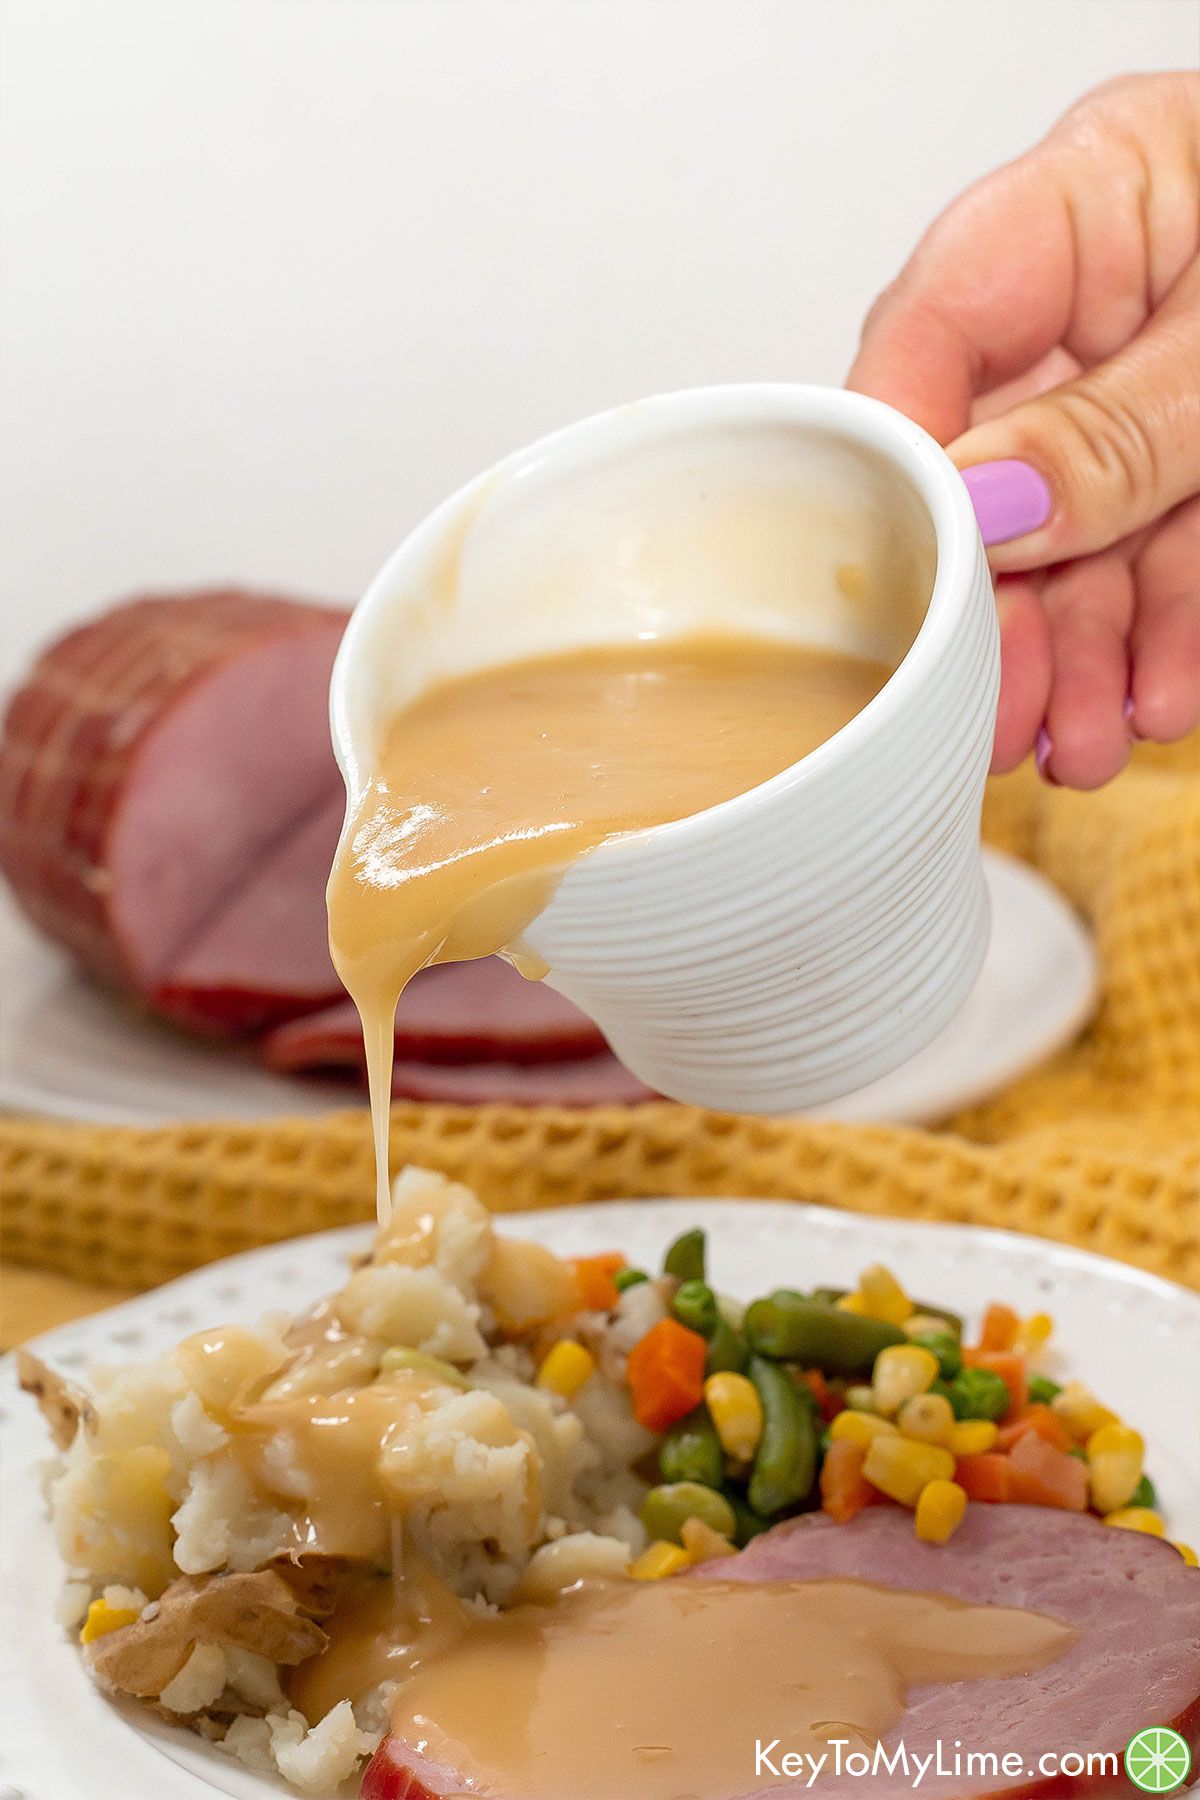 Pouring gravy on top of a slice of ham.